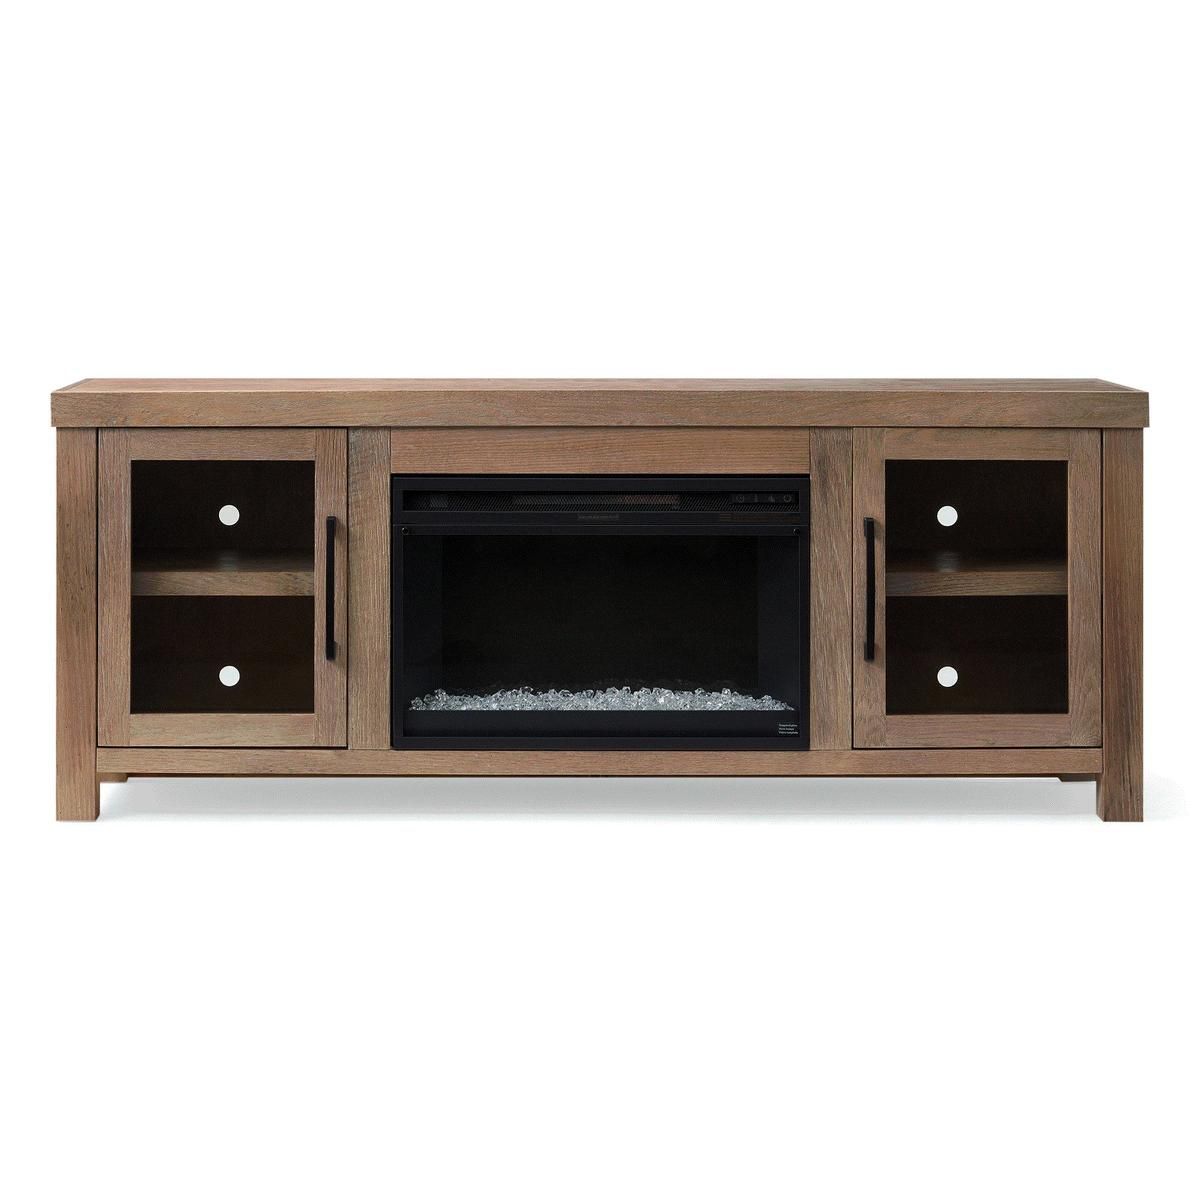 Sussex Fireplace Console